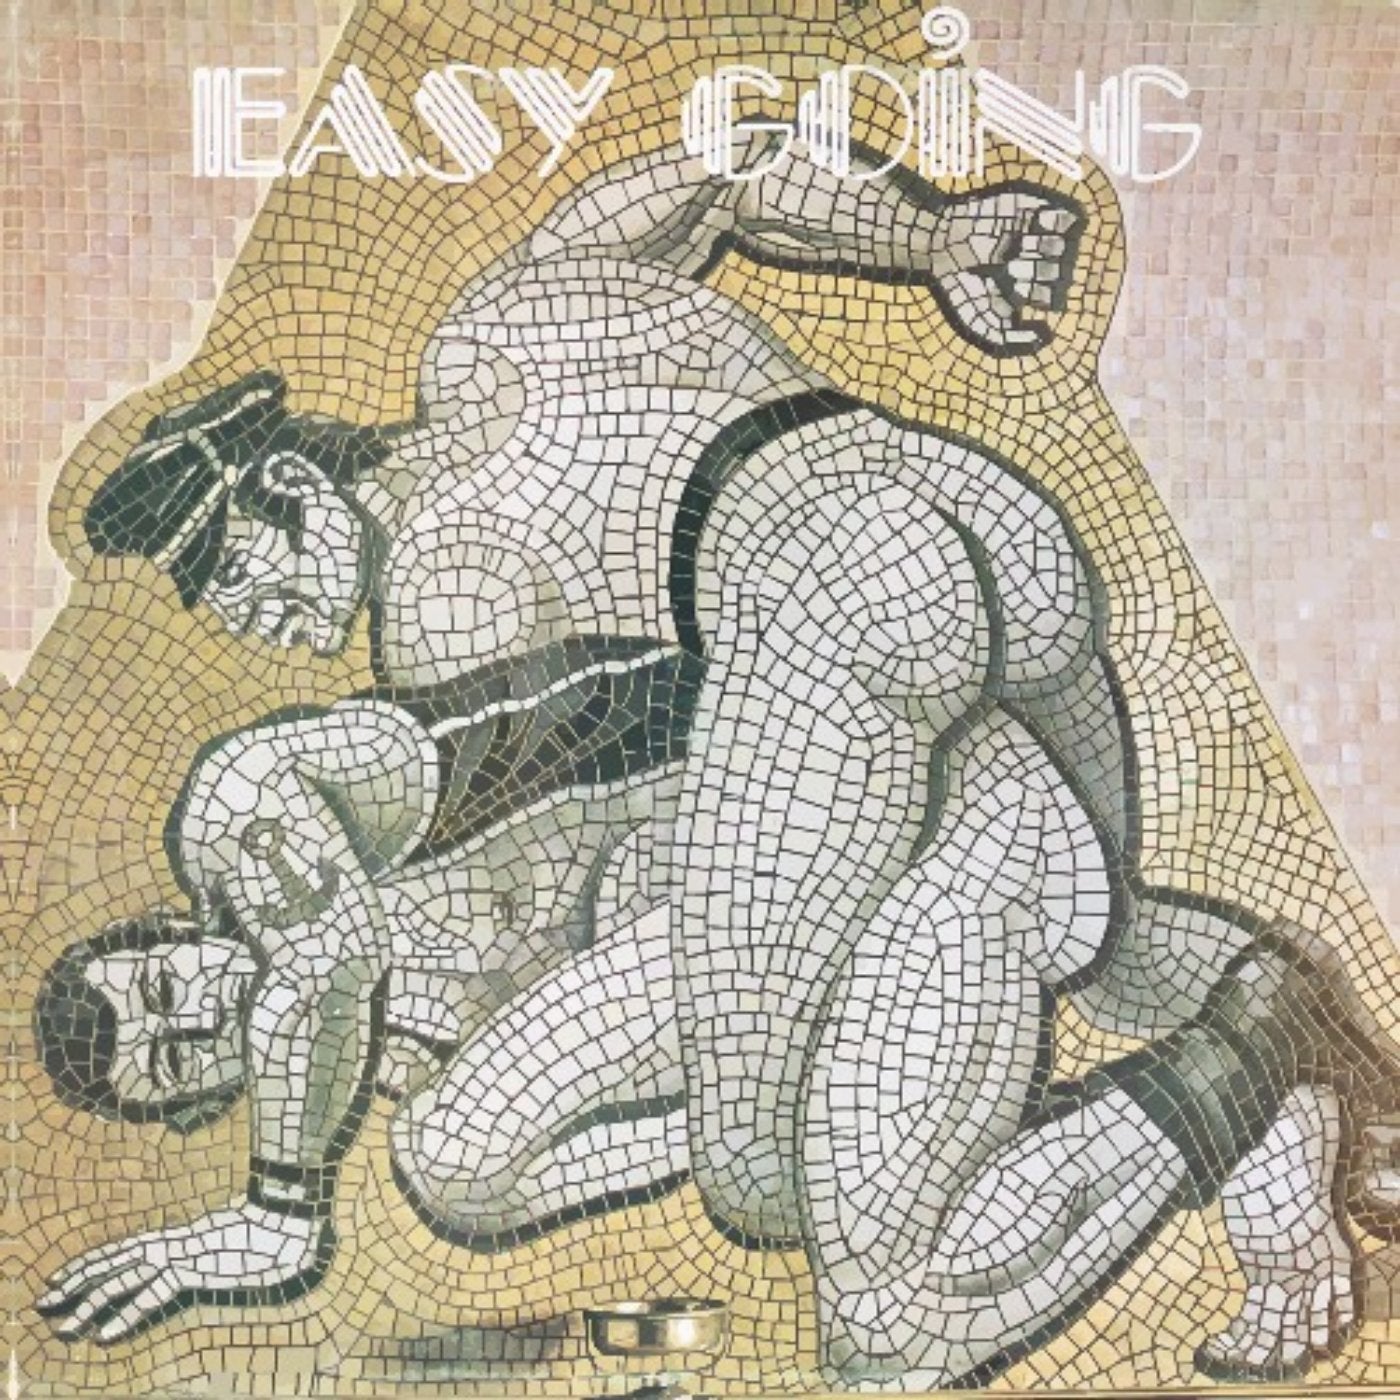 Easy Going (Remastered 2019)